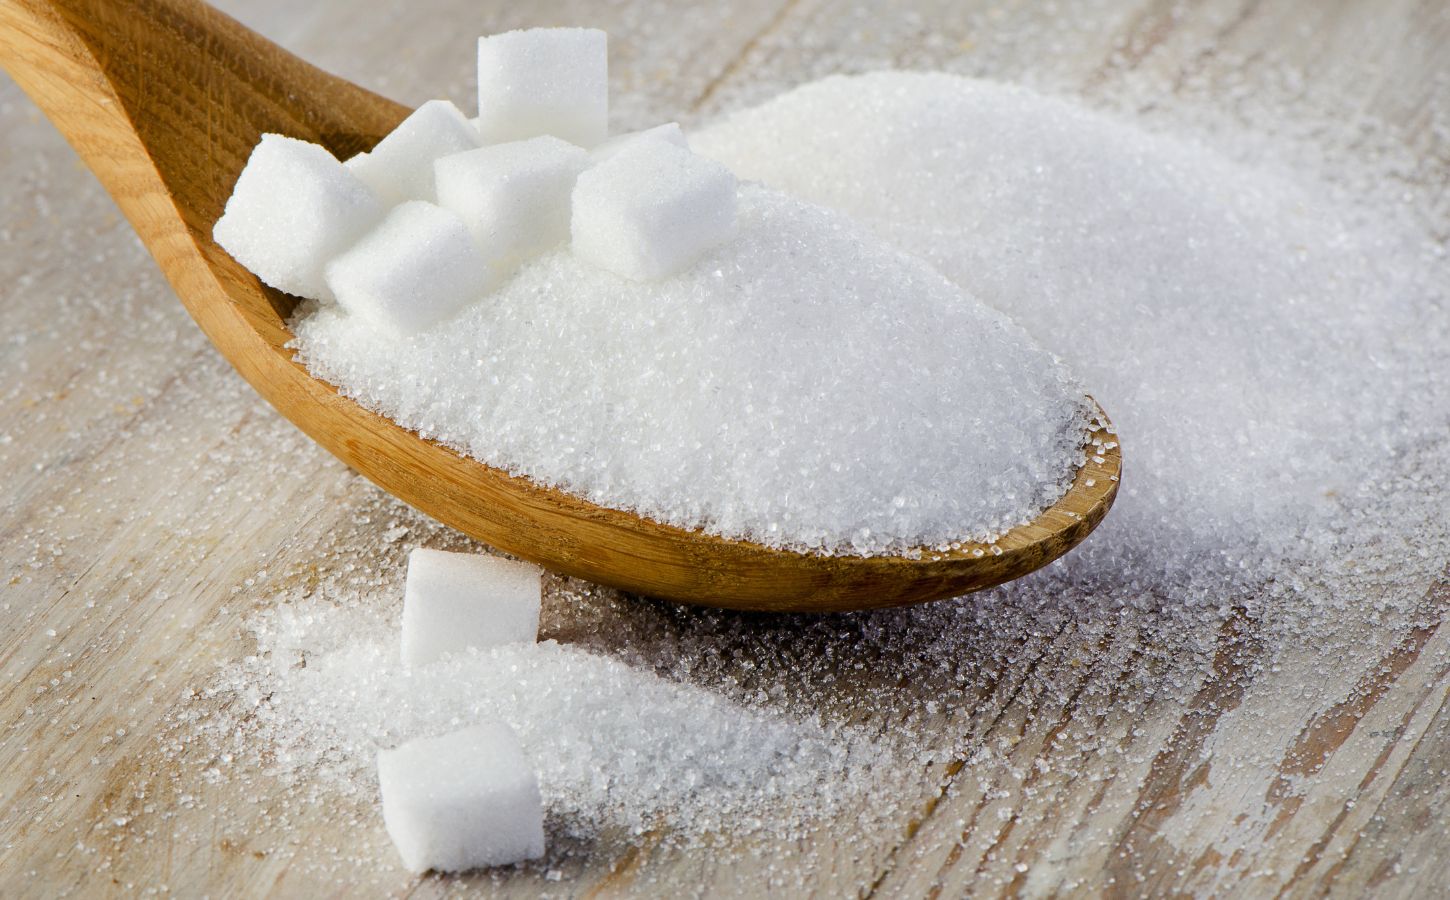 Granulated sugar and sugar cubes, which are often made from bone char, on a wooden spoon